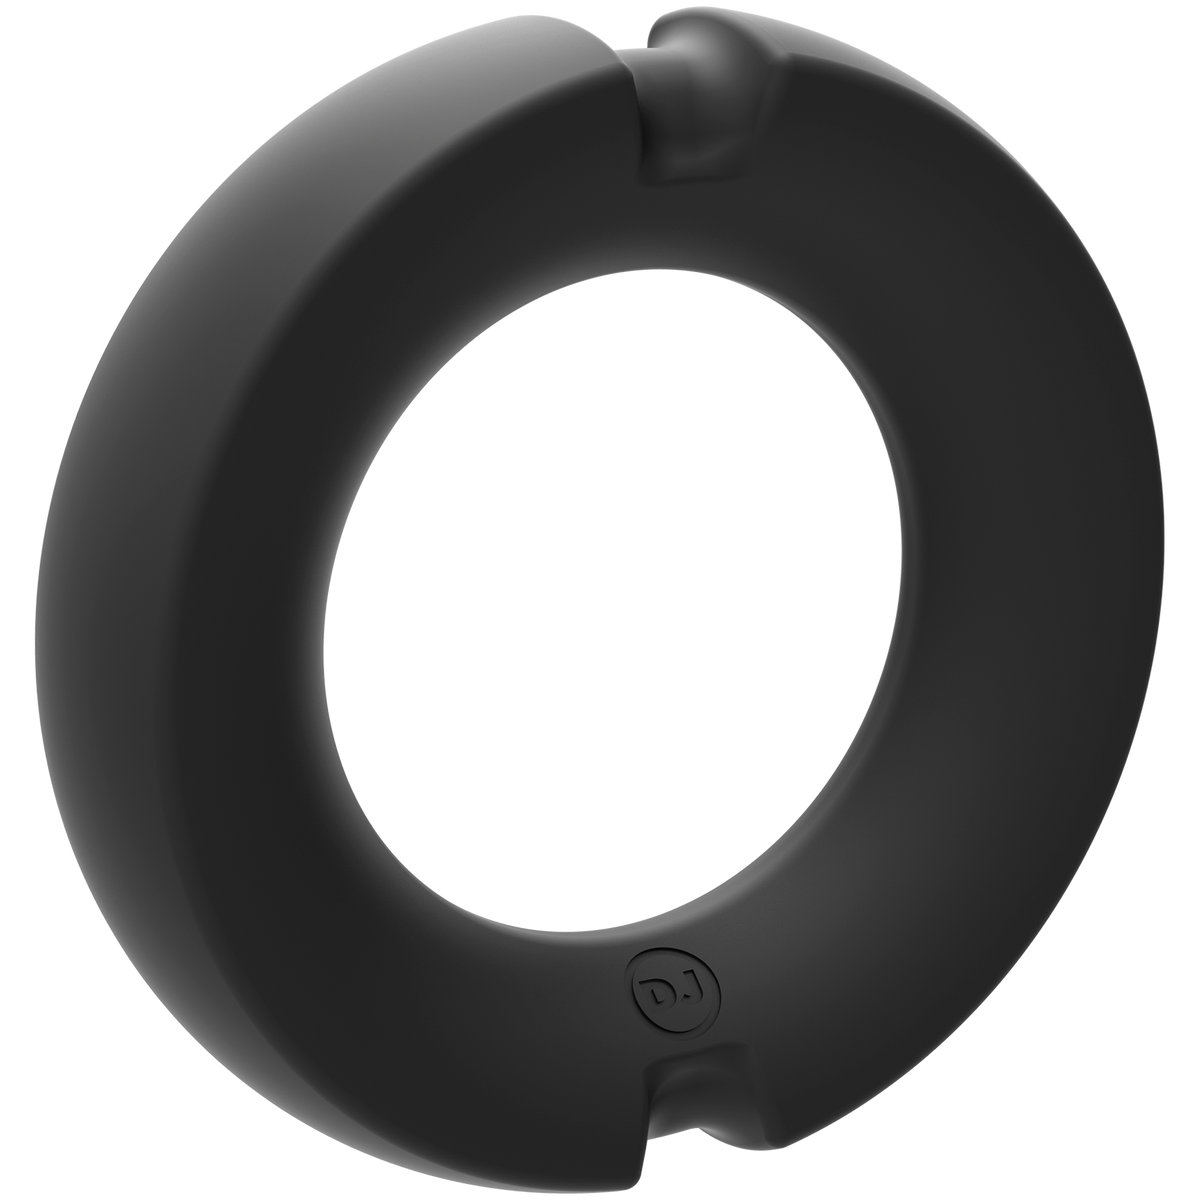 Doc Johnson KINK Silicone-Covered Metal Cock Ring - 50mm